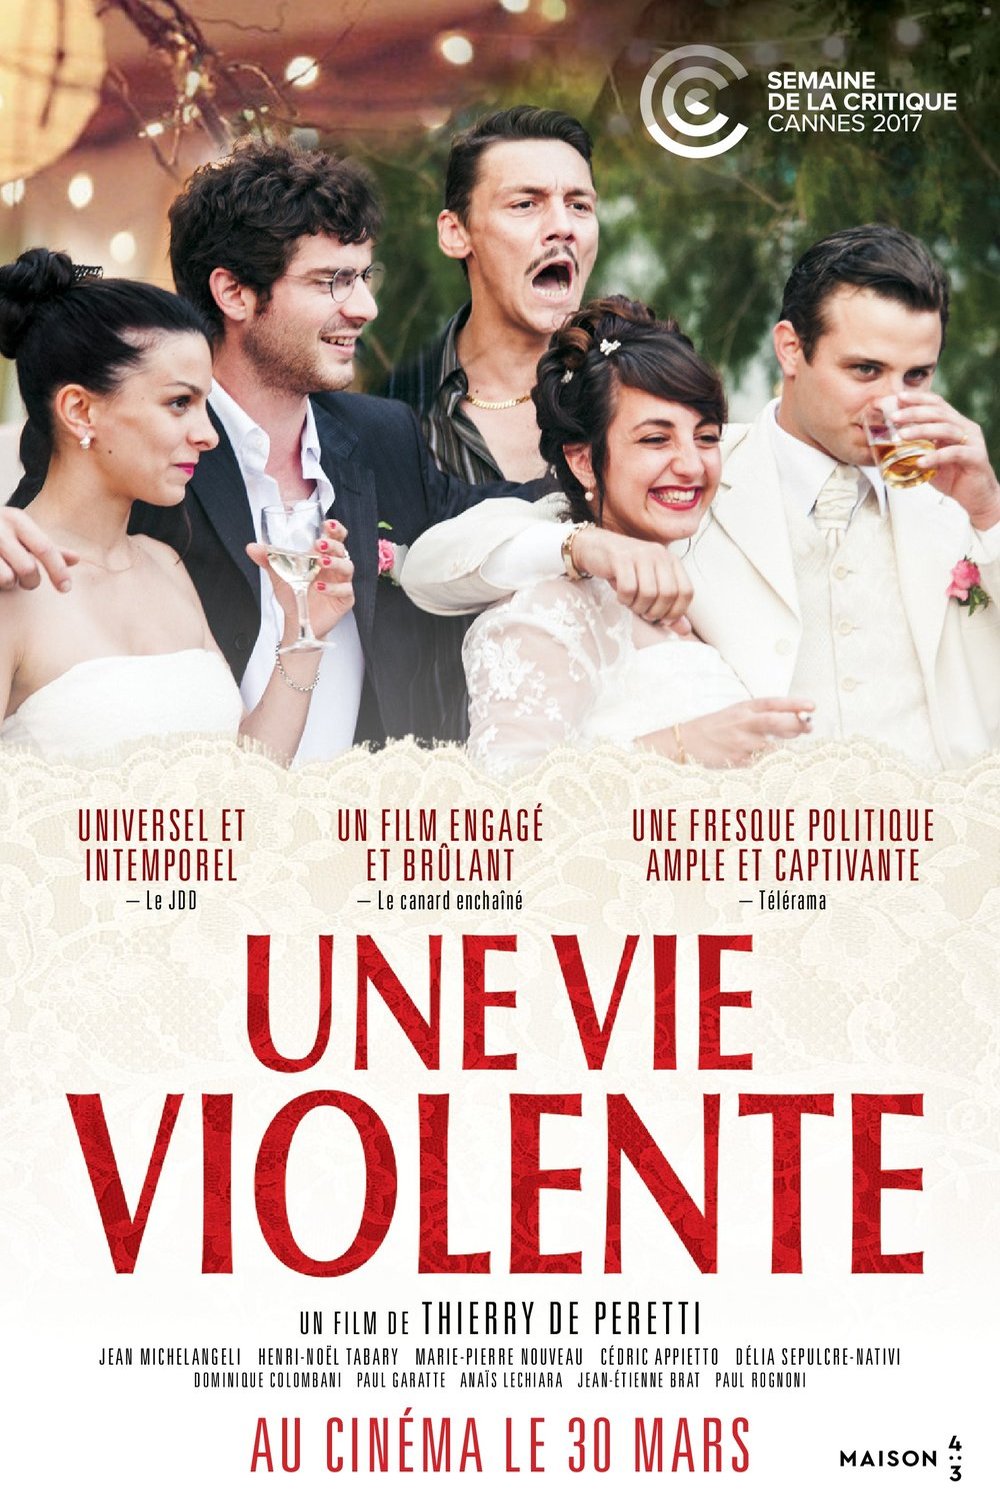 Poster of the movie A Violent Life